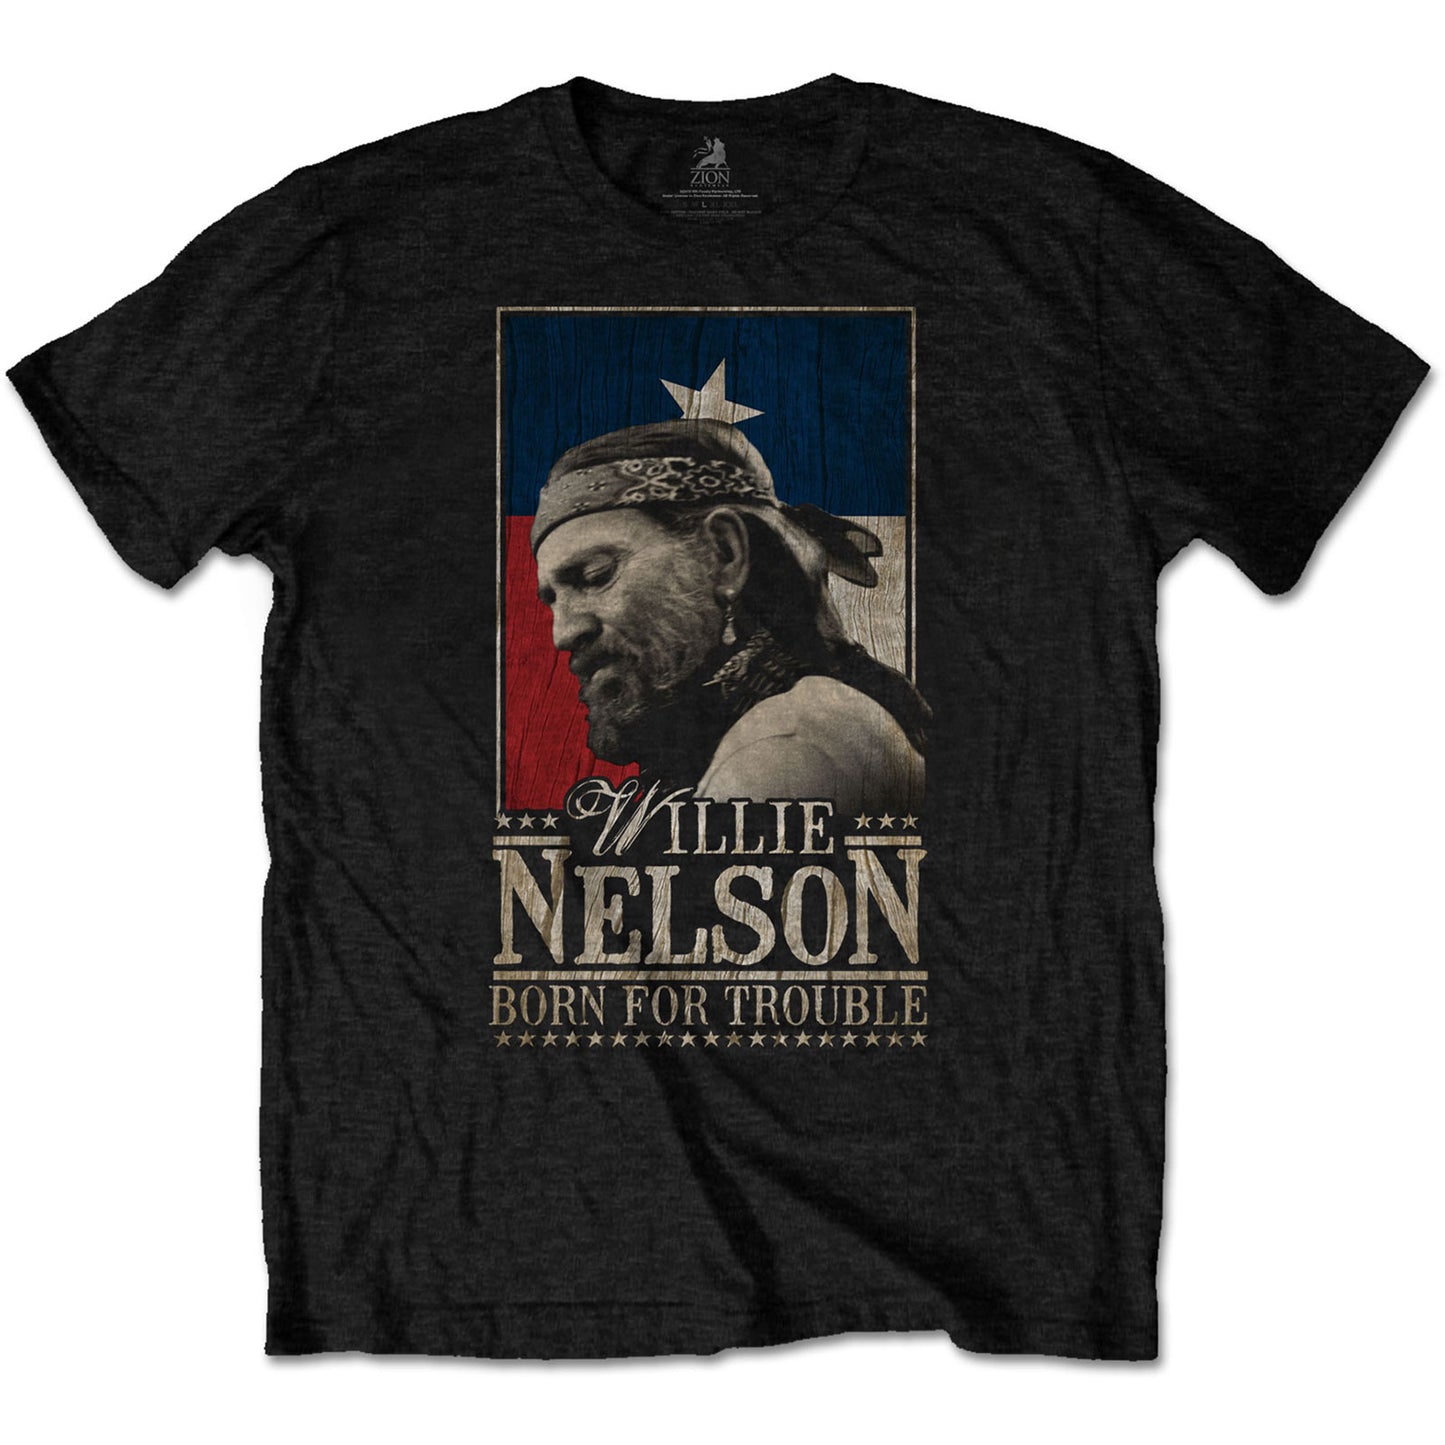 Willie Nelson T-Shirt: Born For Trouble